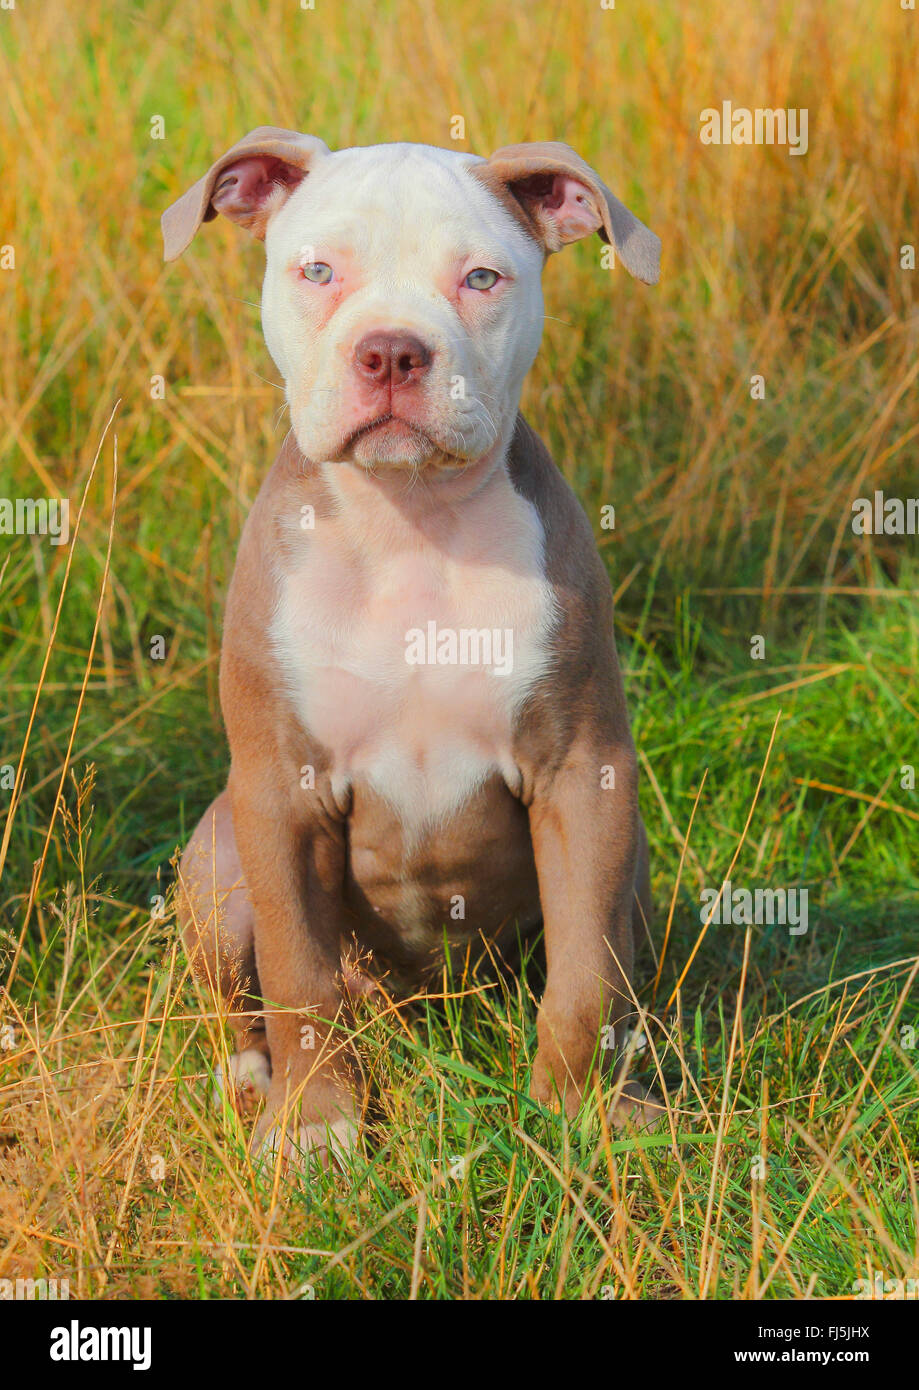 Olde English Bulldog (Canis lupus f. familiaris), twelve weaks old puppy sitting in a meadow, Germany Stock Photo